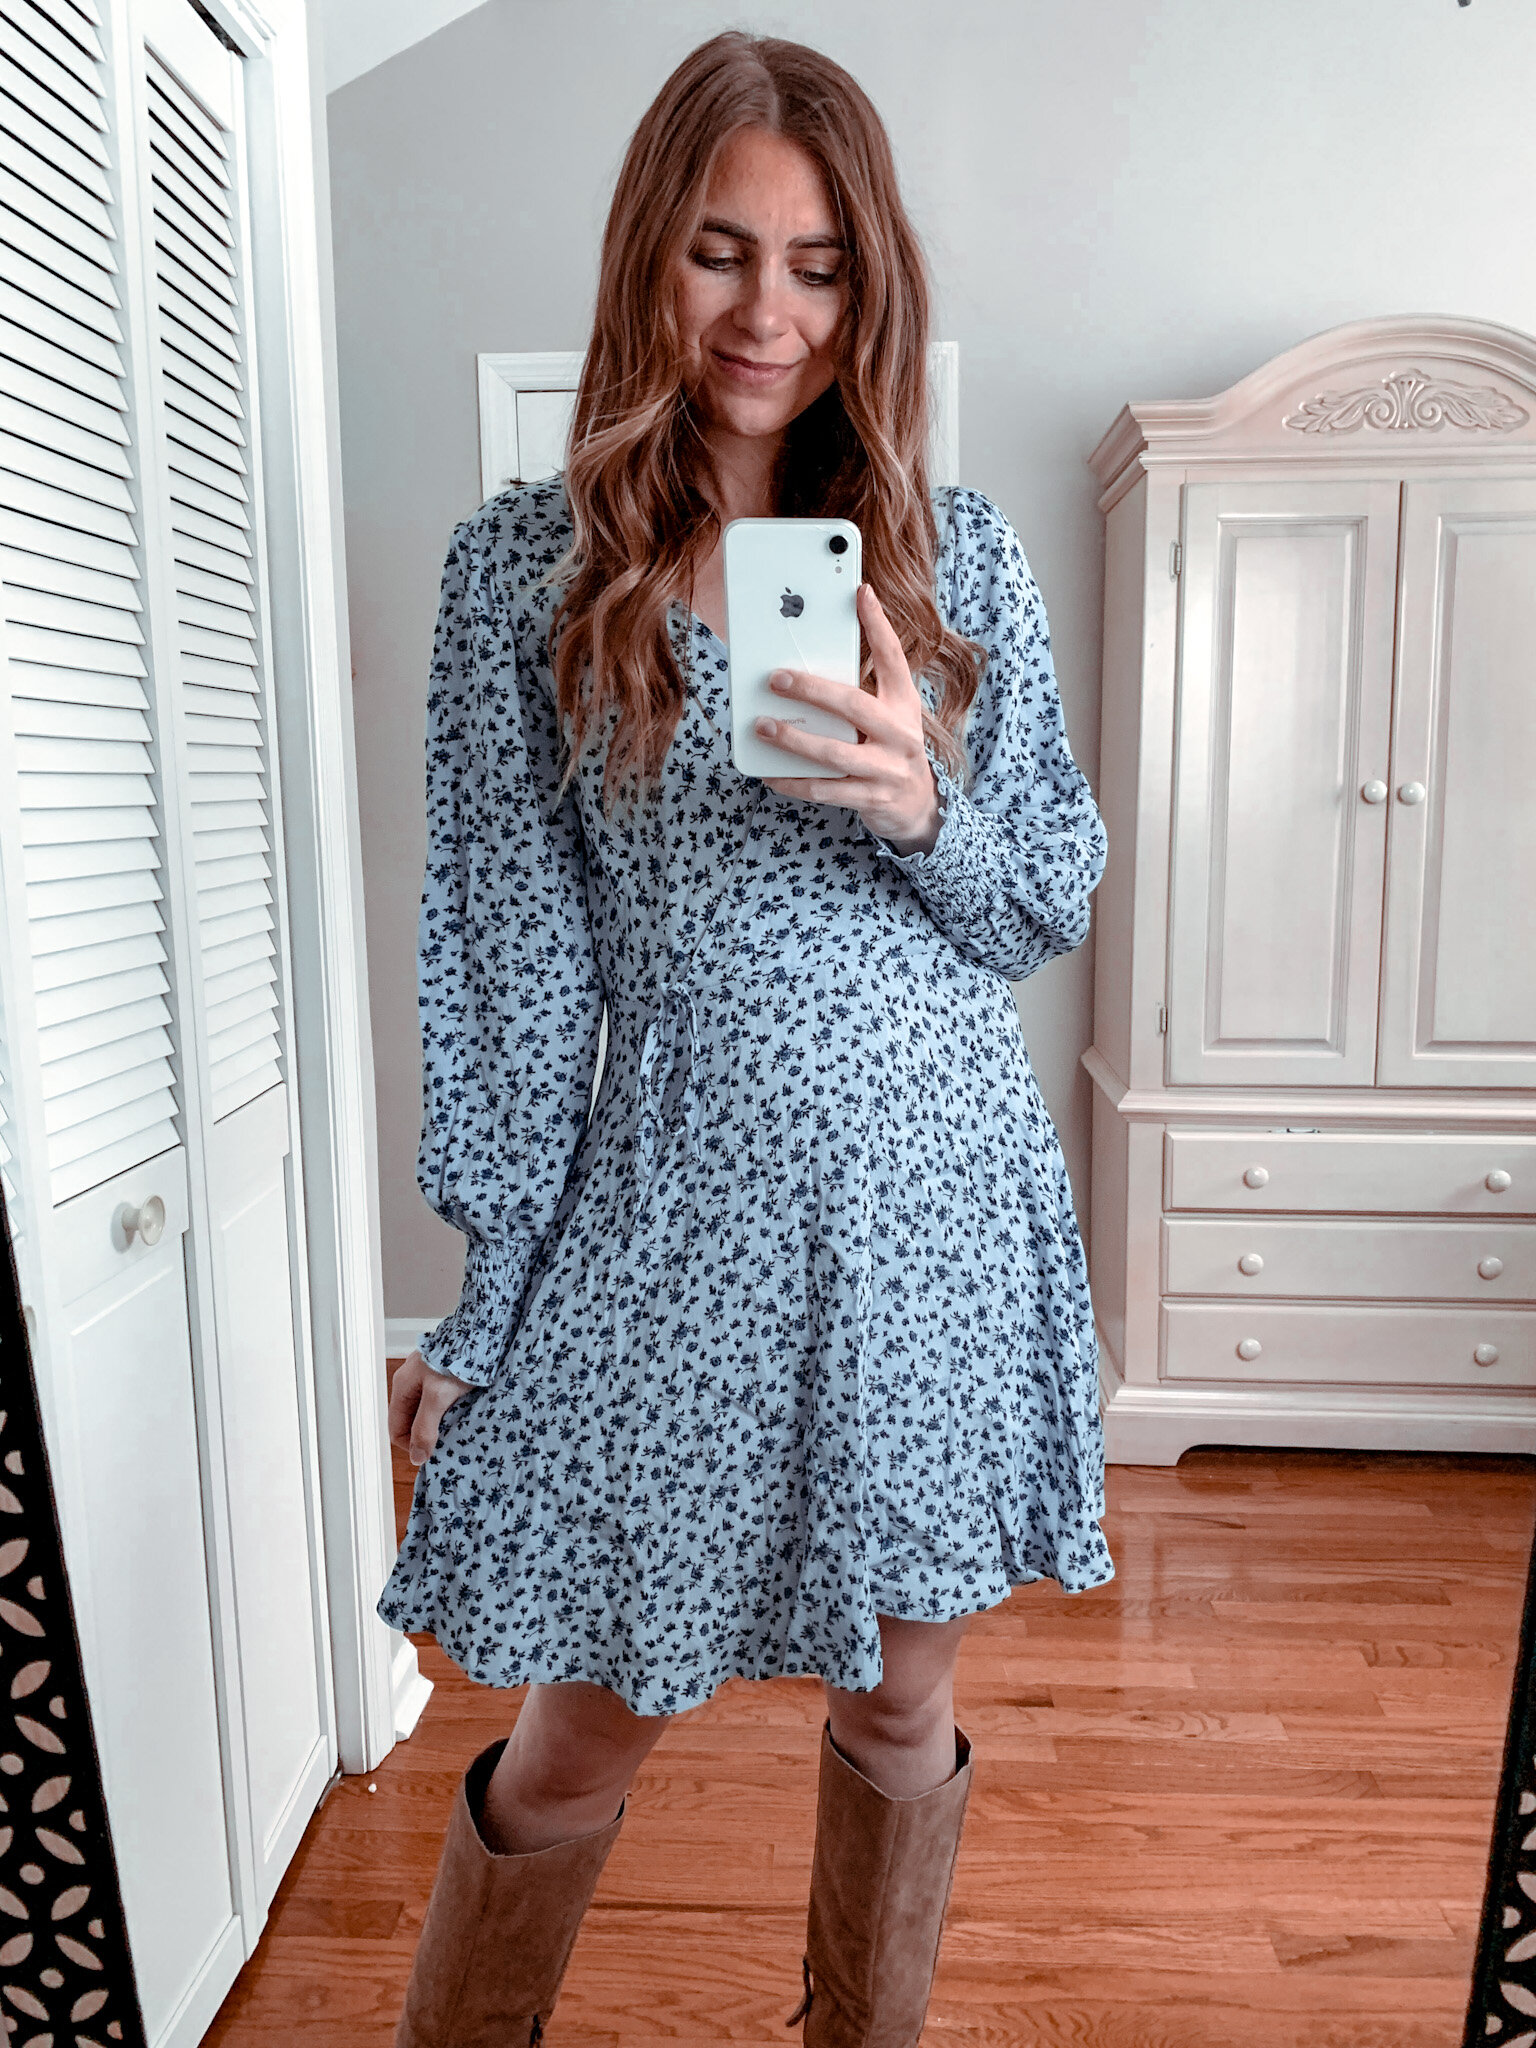 The Best Target Fashion Finds Spring & Summer 2021 — Champagne & Savings